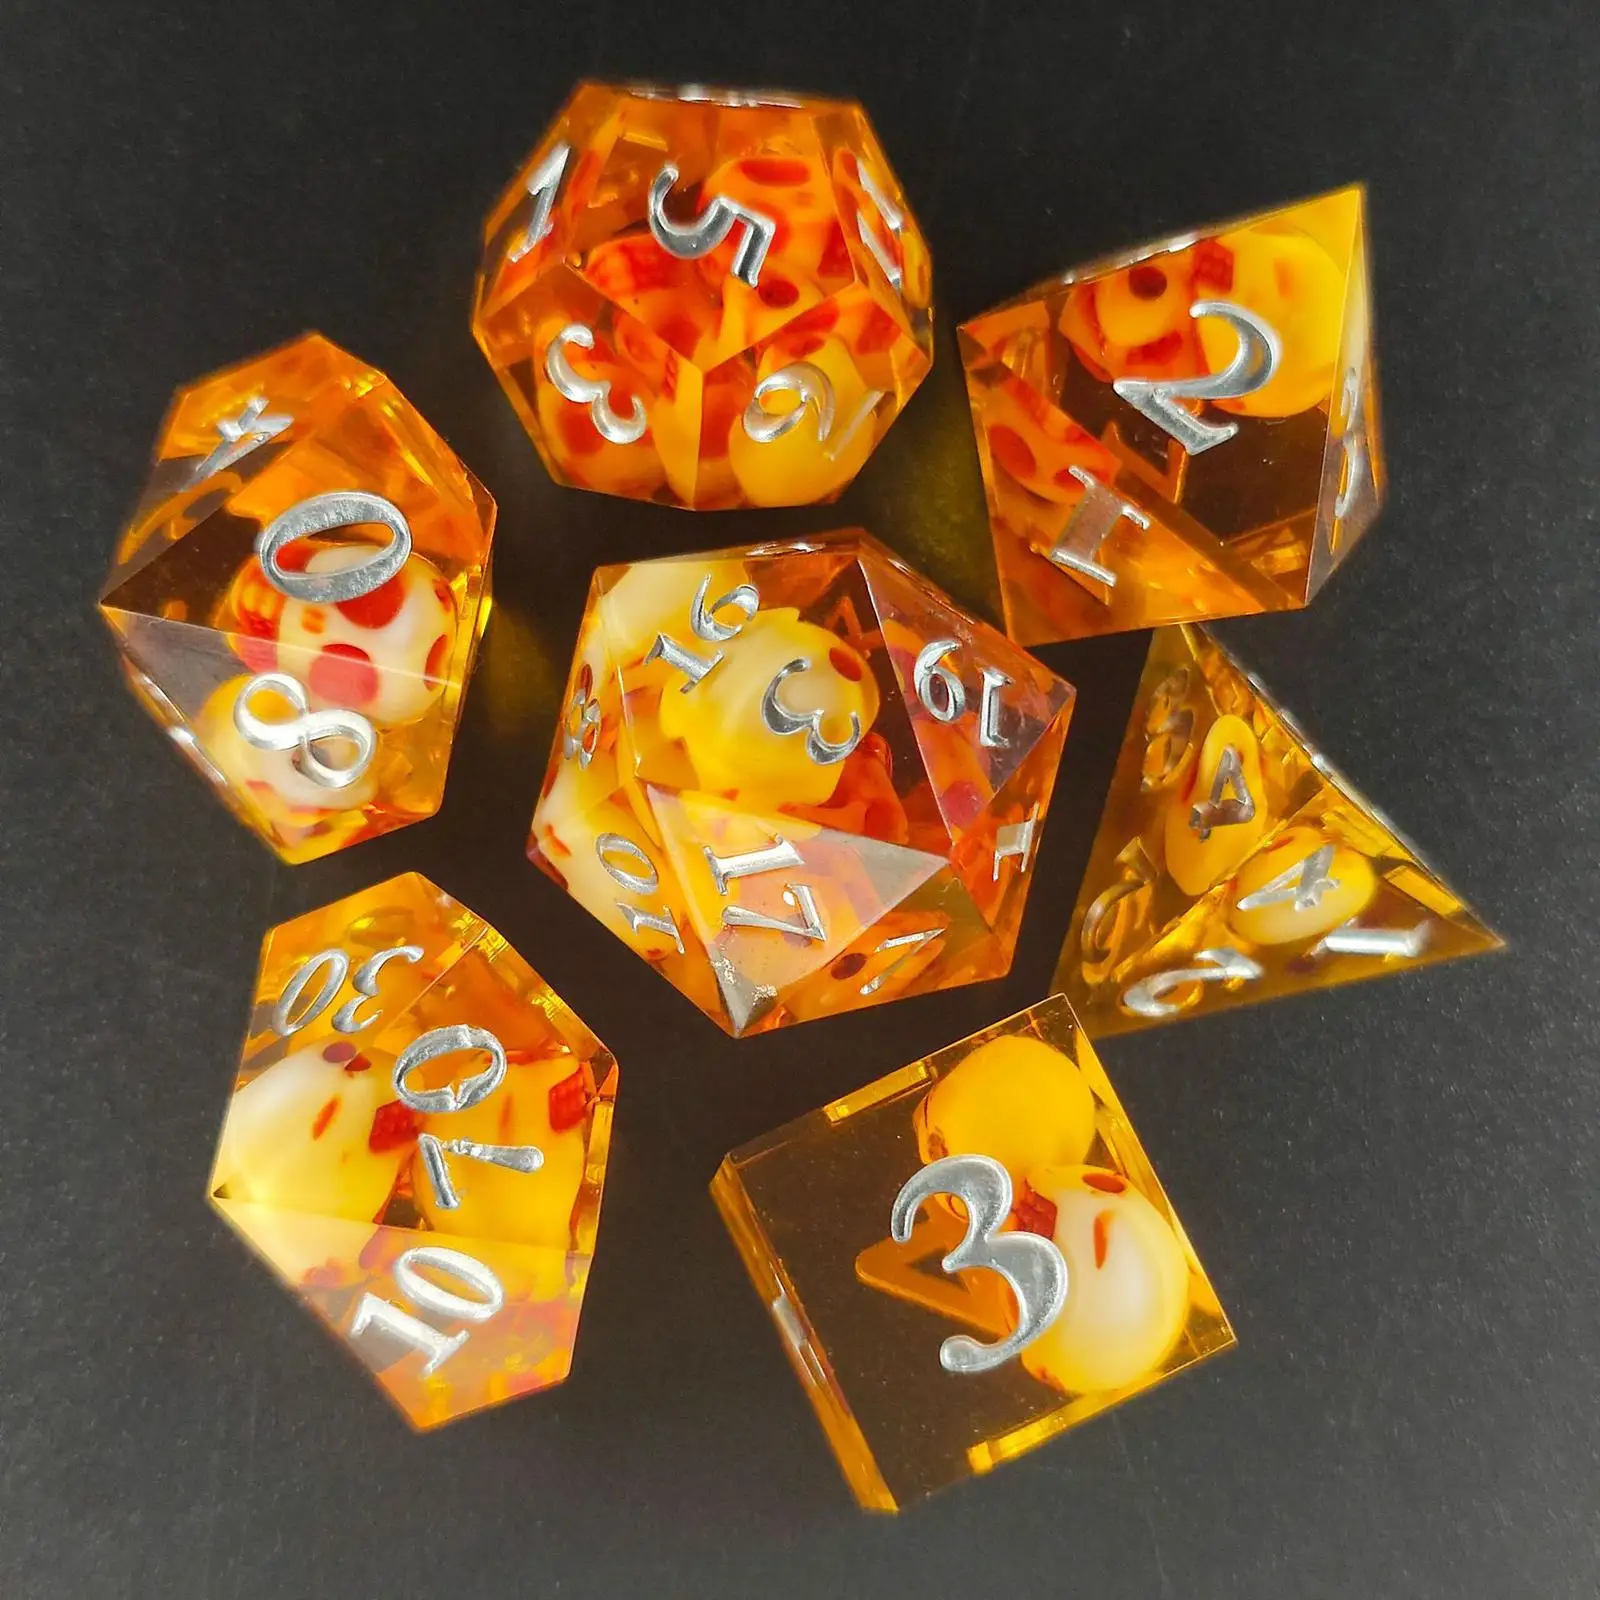 Set of 7 Multi Sided Dice Polyhedral Dices for Roleplaying DND Board Game